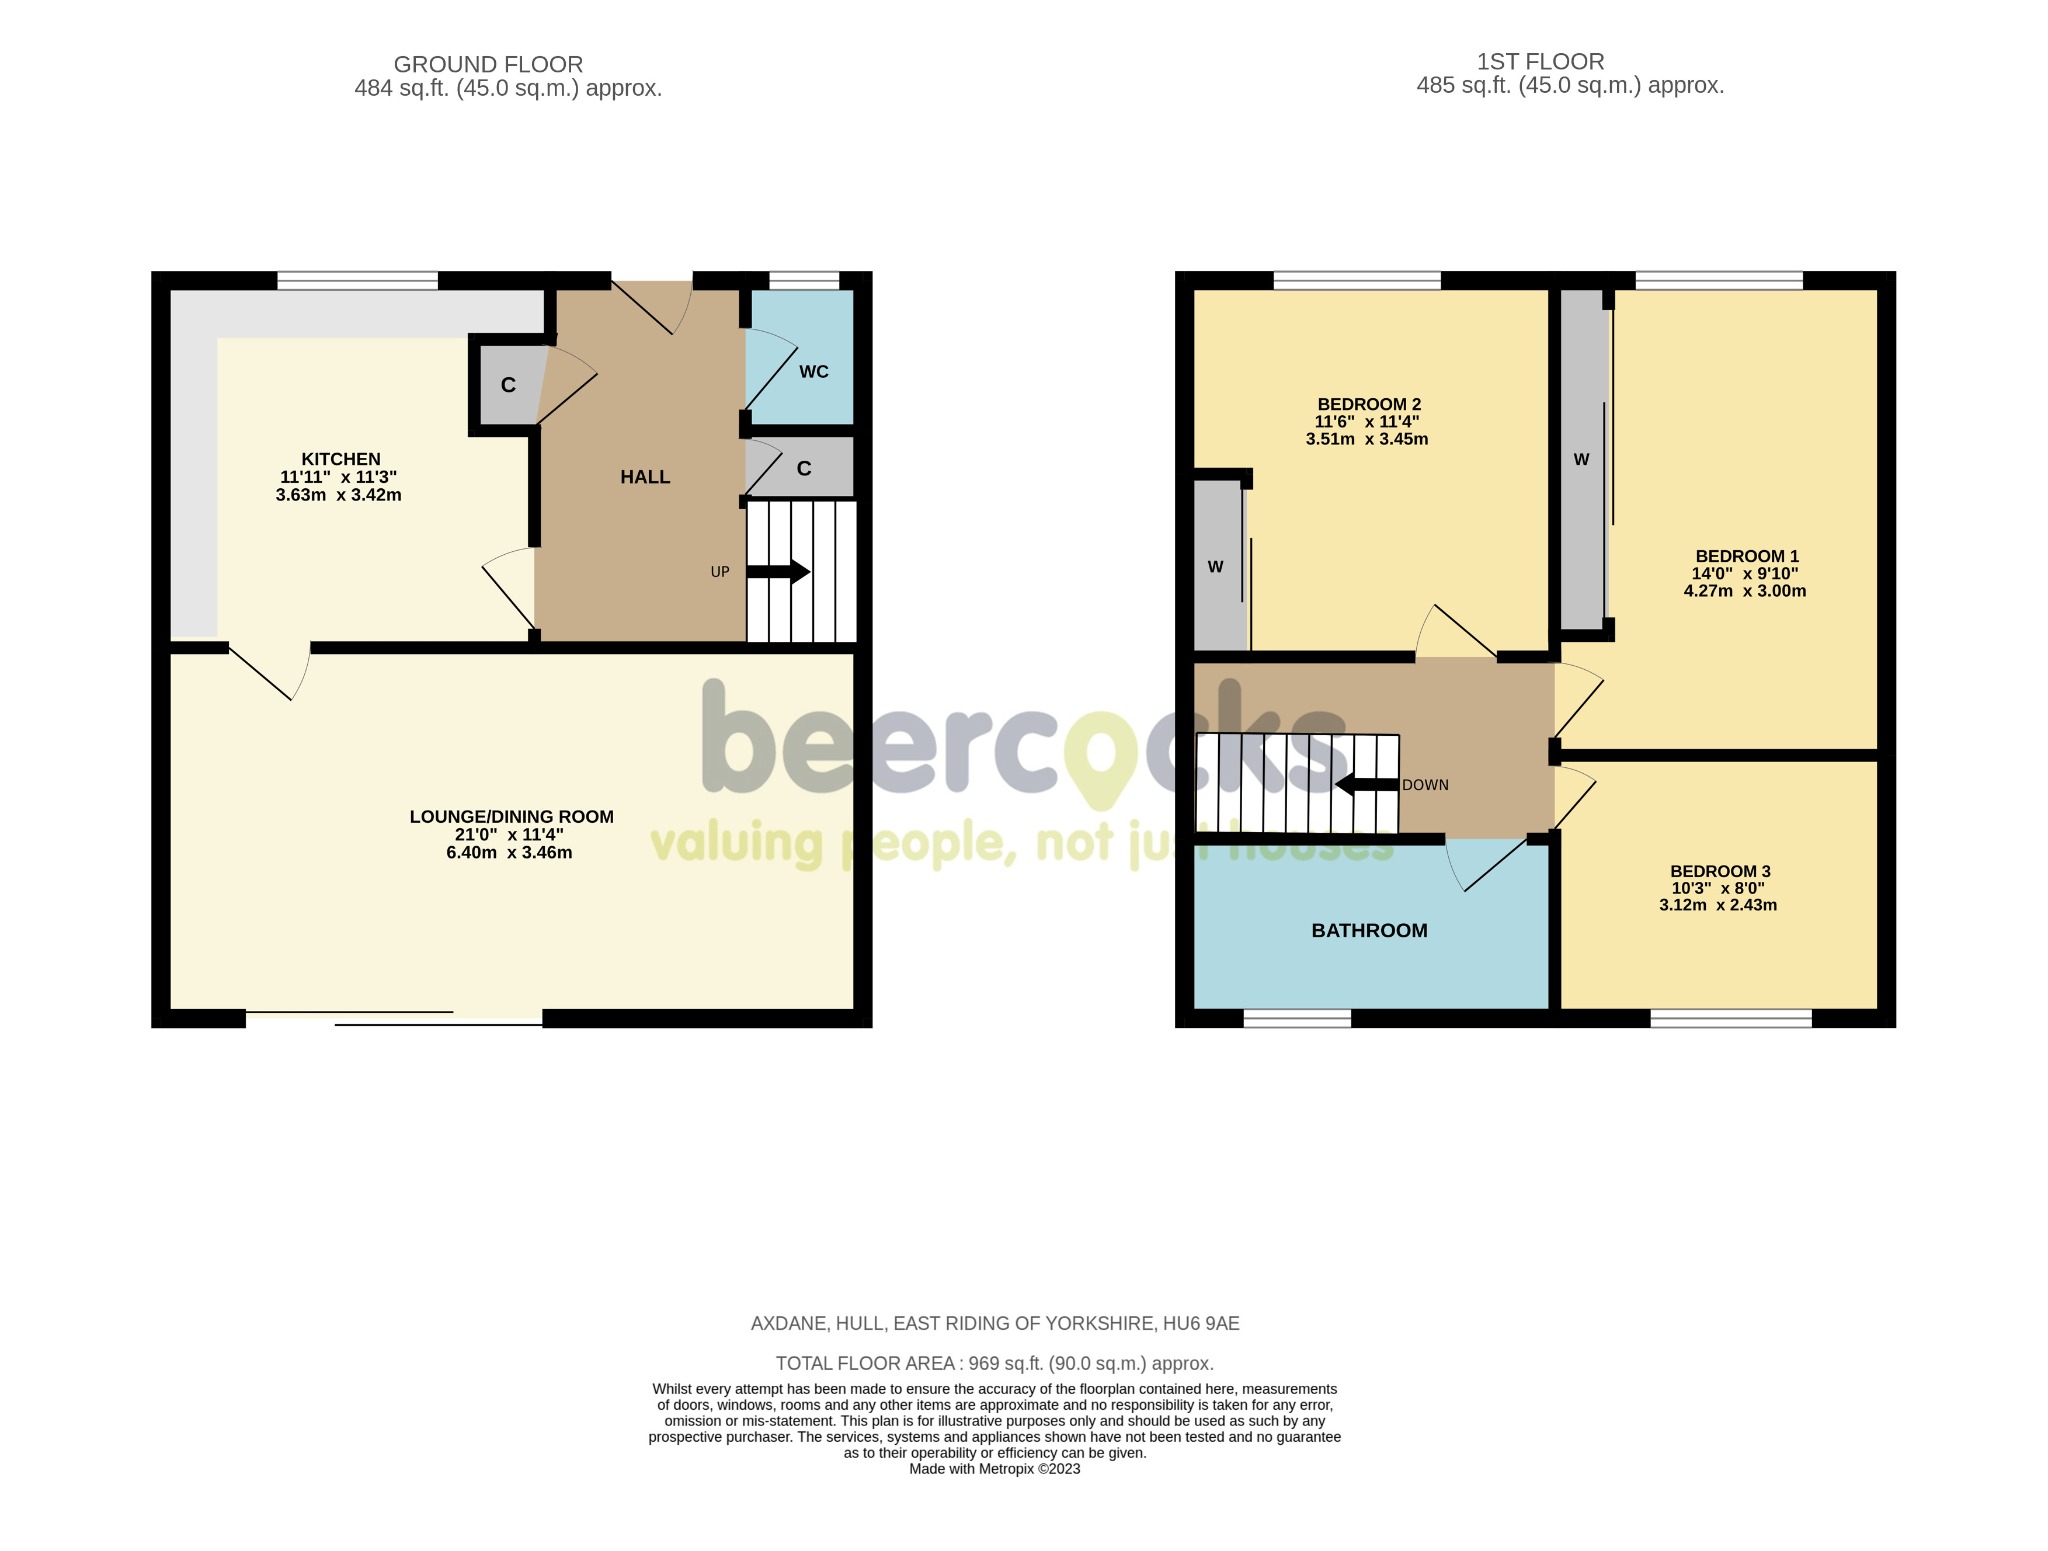 3 bed end of terrace house for sale in Axdane, Hull - Property Floorplan